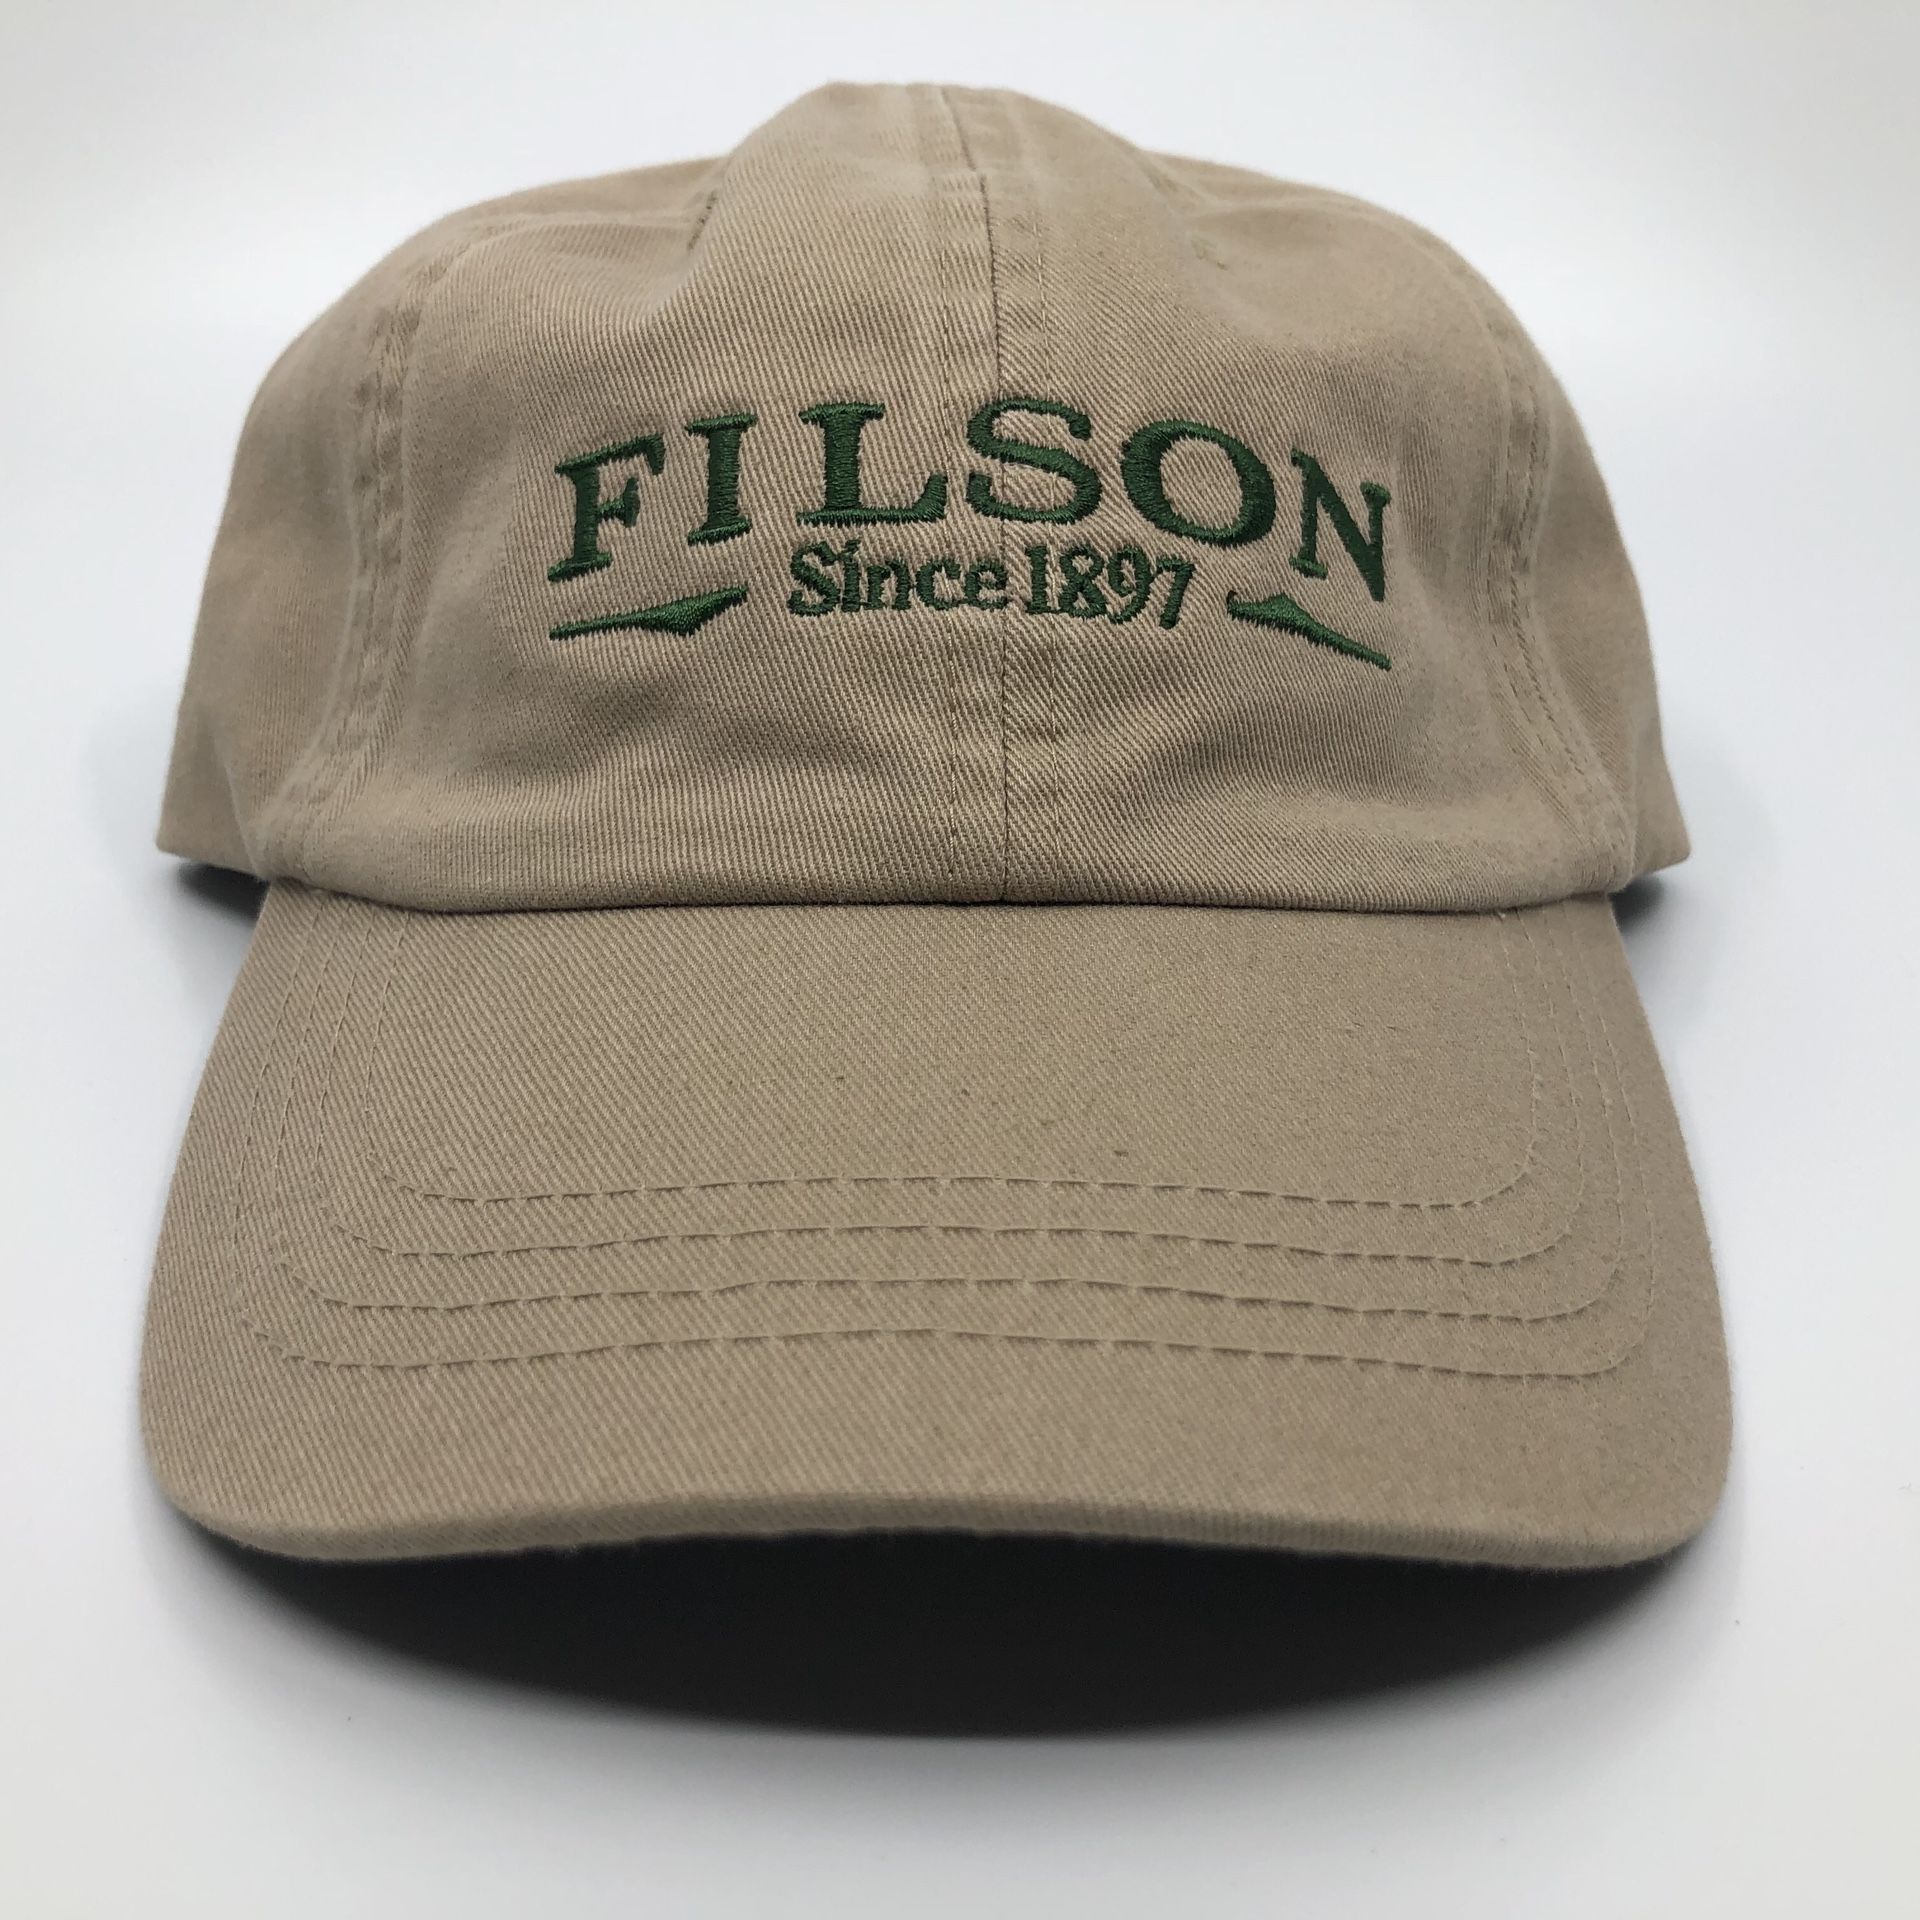 New FILSON Hat Cap Sports Hunting Fishing Outdoors